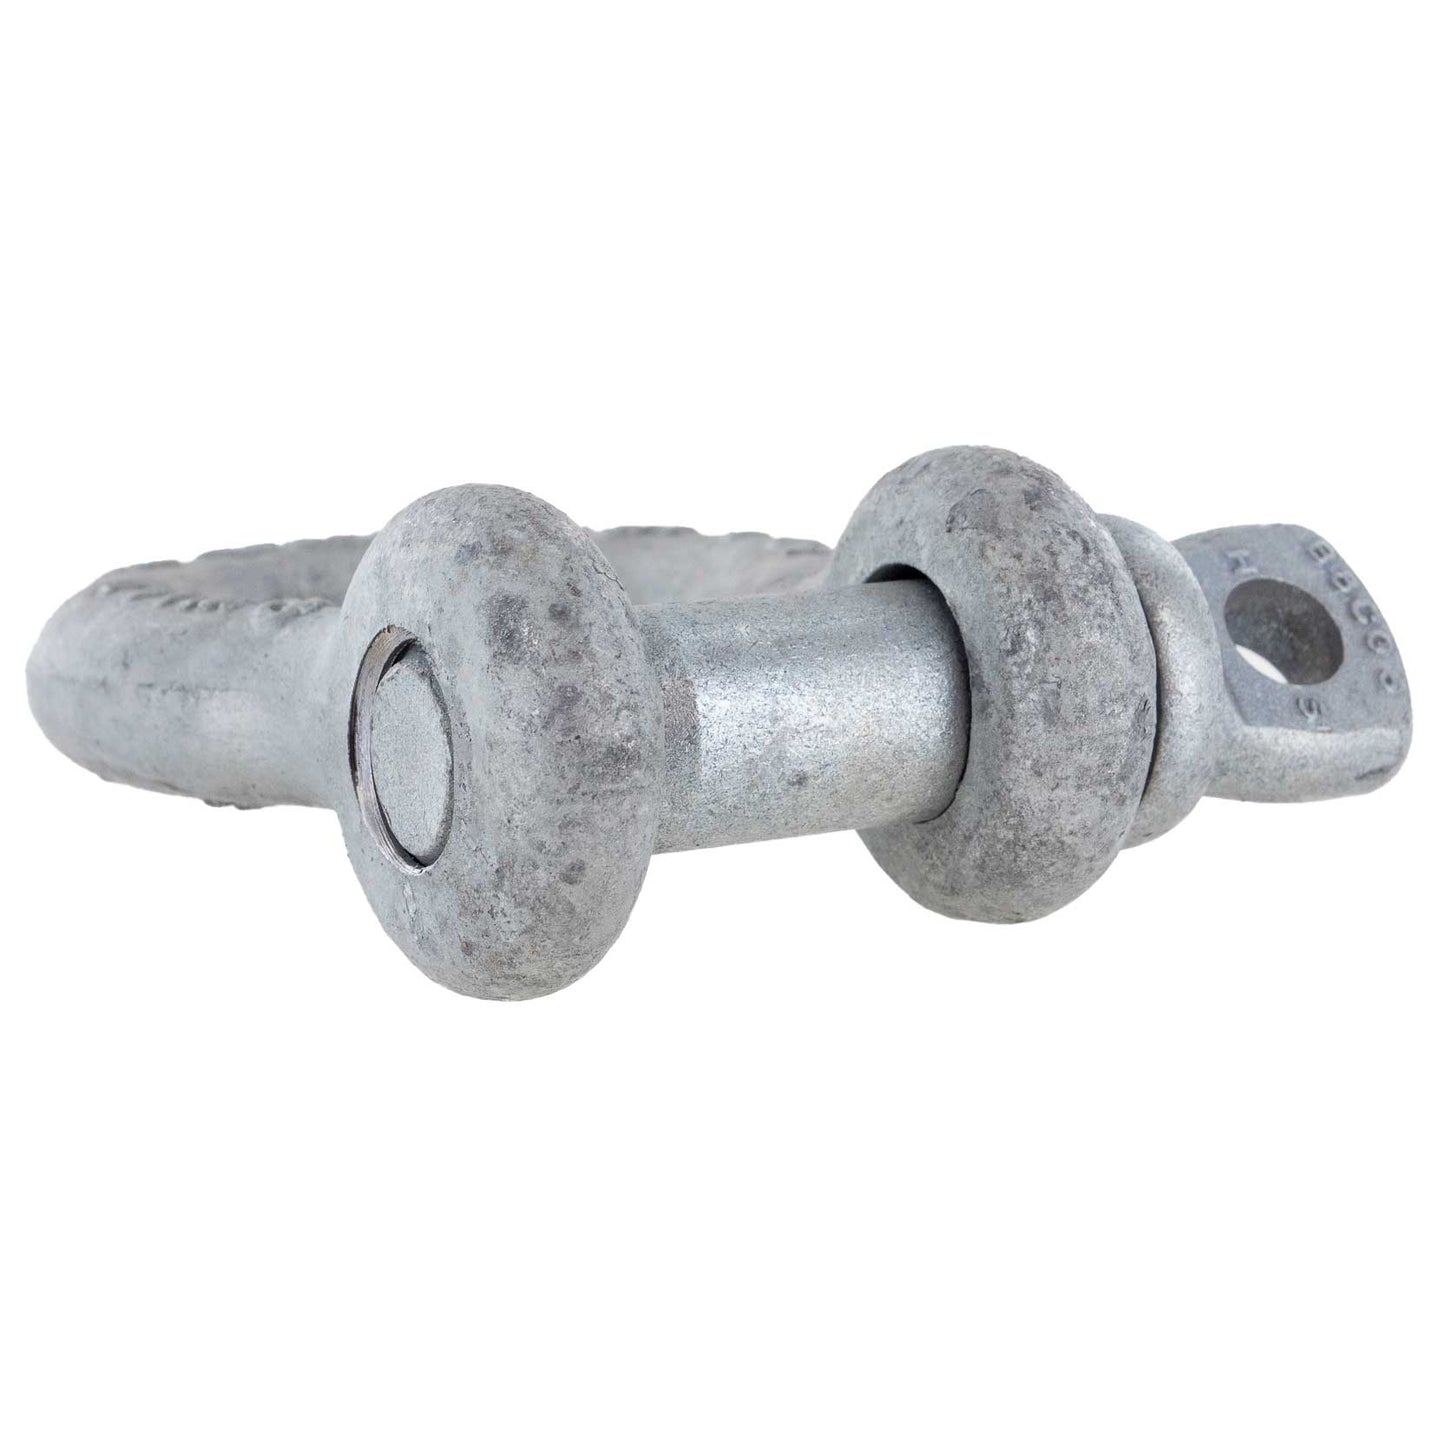 7/16" Crosby® Alloy Screw Pin Anchor Shackle | G-209A - 2.66 Ton side view